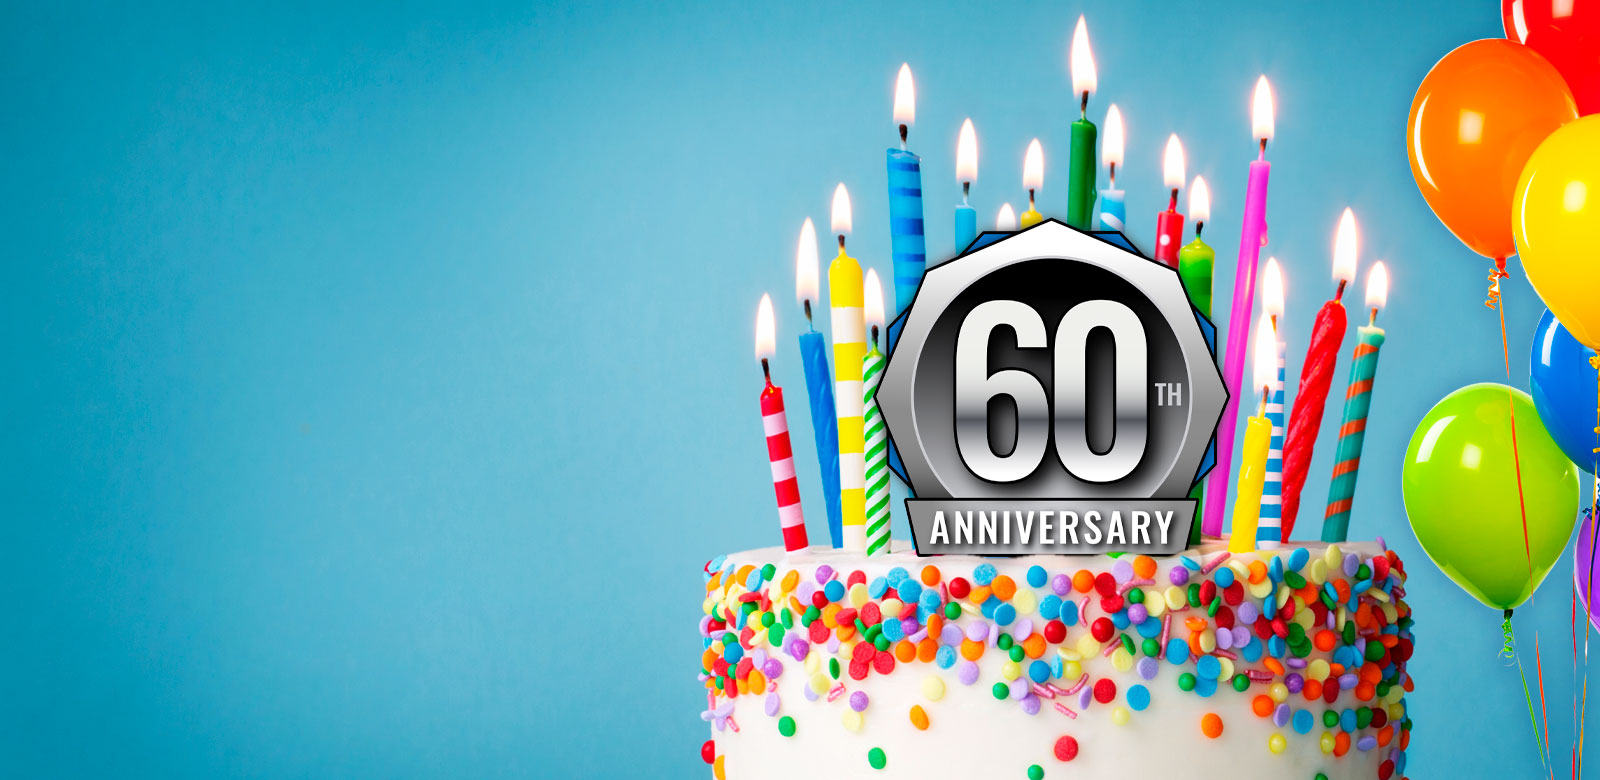 Linked image showing 60th anniversary cake and balloons.